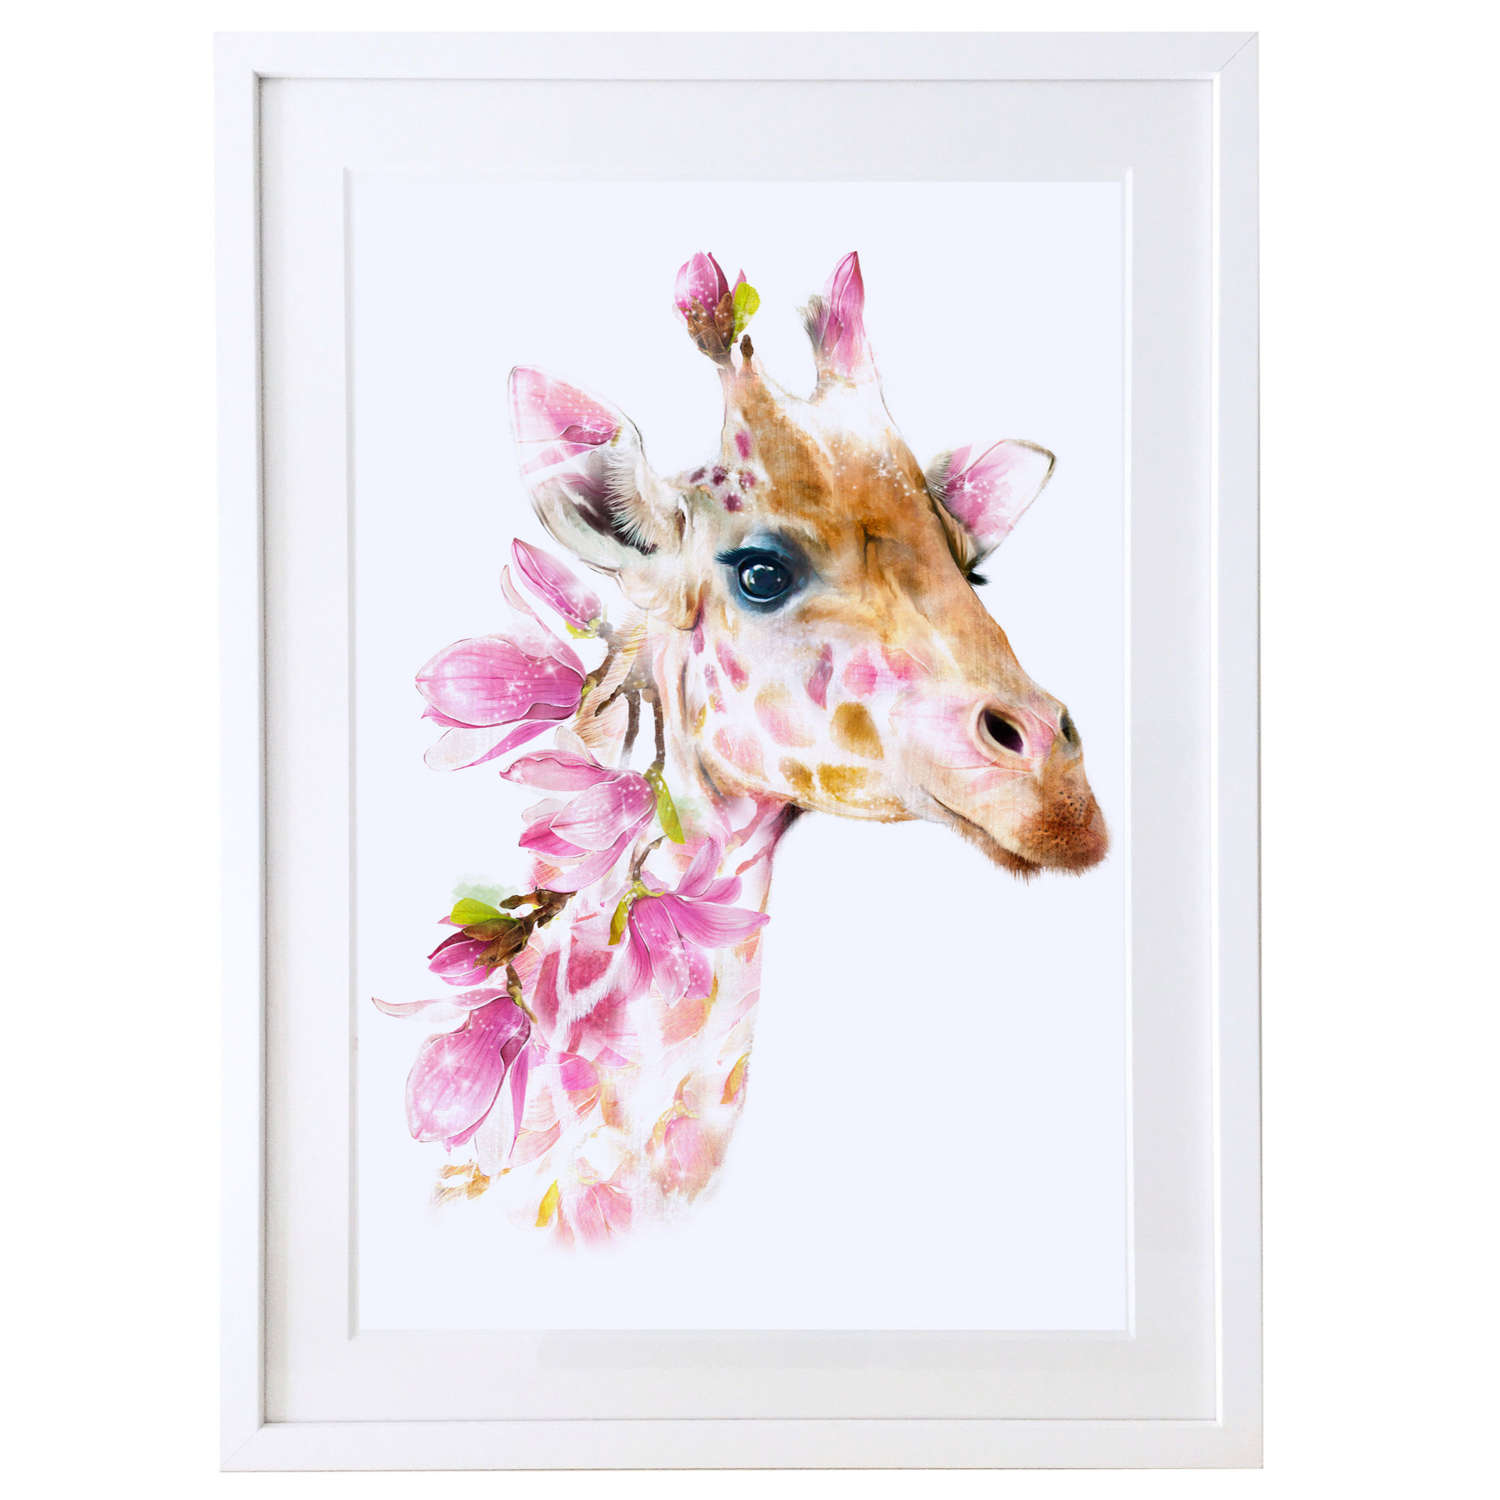 Giraffe print with white satin finish solid wood frame